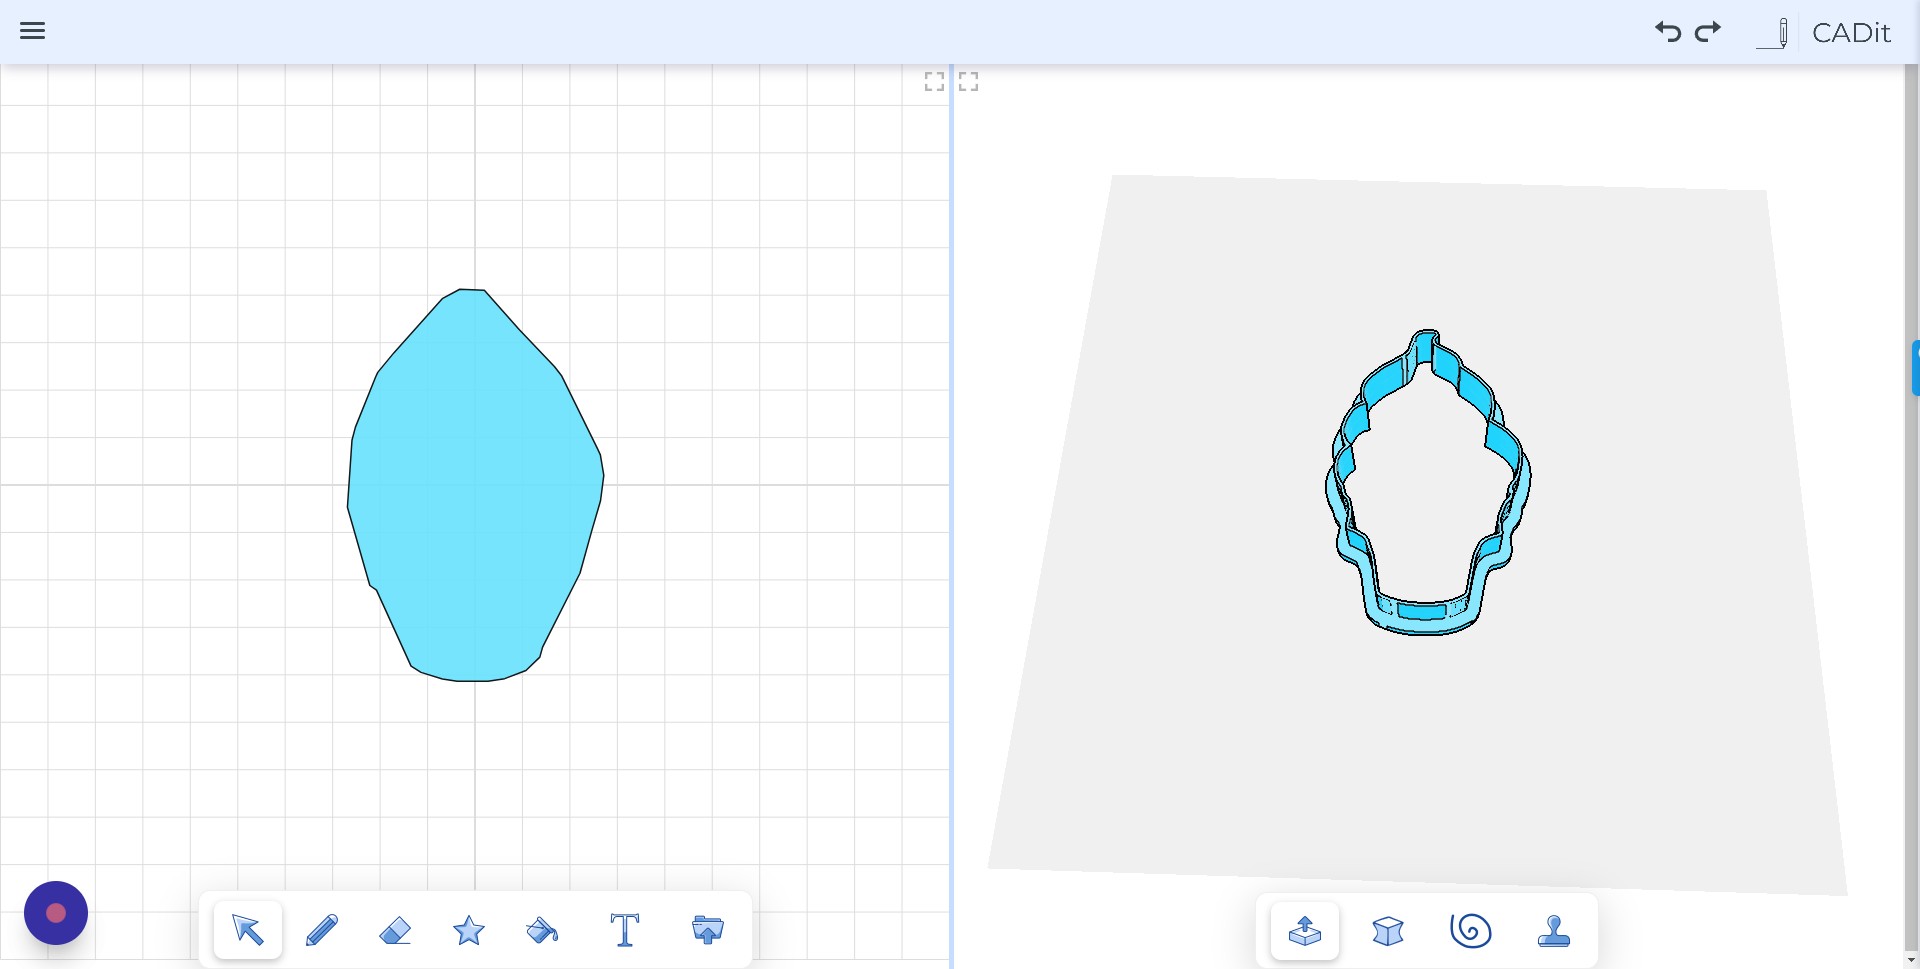 It will bring your cutter into CADit Now we will add a bar In CADit you start by drawing the shape you want Click the shapes menu in the toolbar star icon